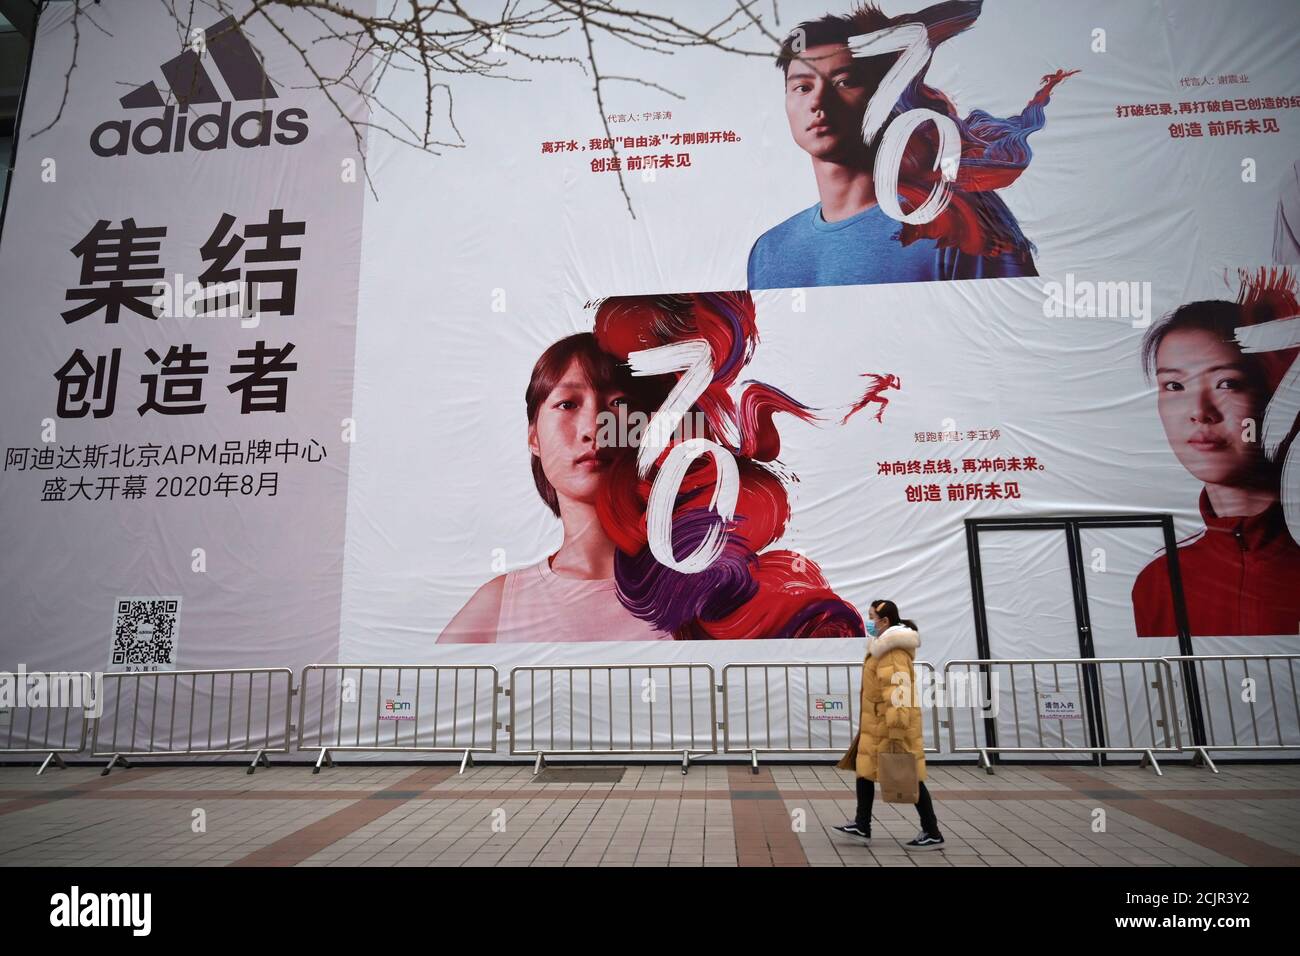 A woman wearing a face mask walks past a banner advertising new Adidas  store, as the country is hit by an outbreak of the novel coronavirus, in  Beijing, China February 20, 2020.